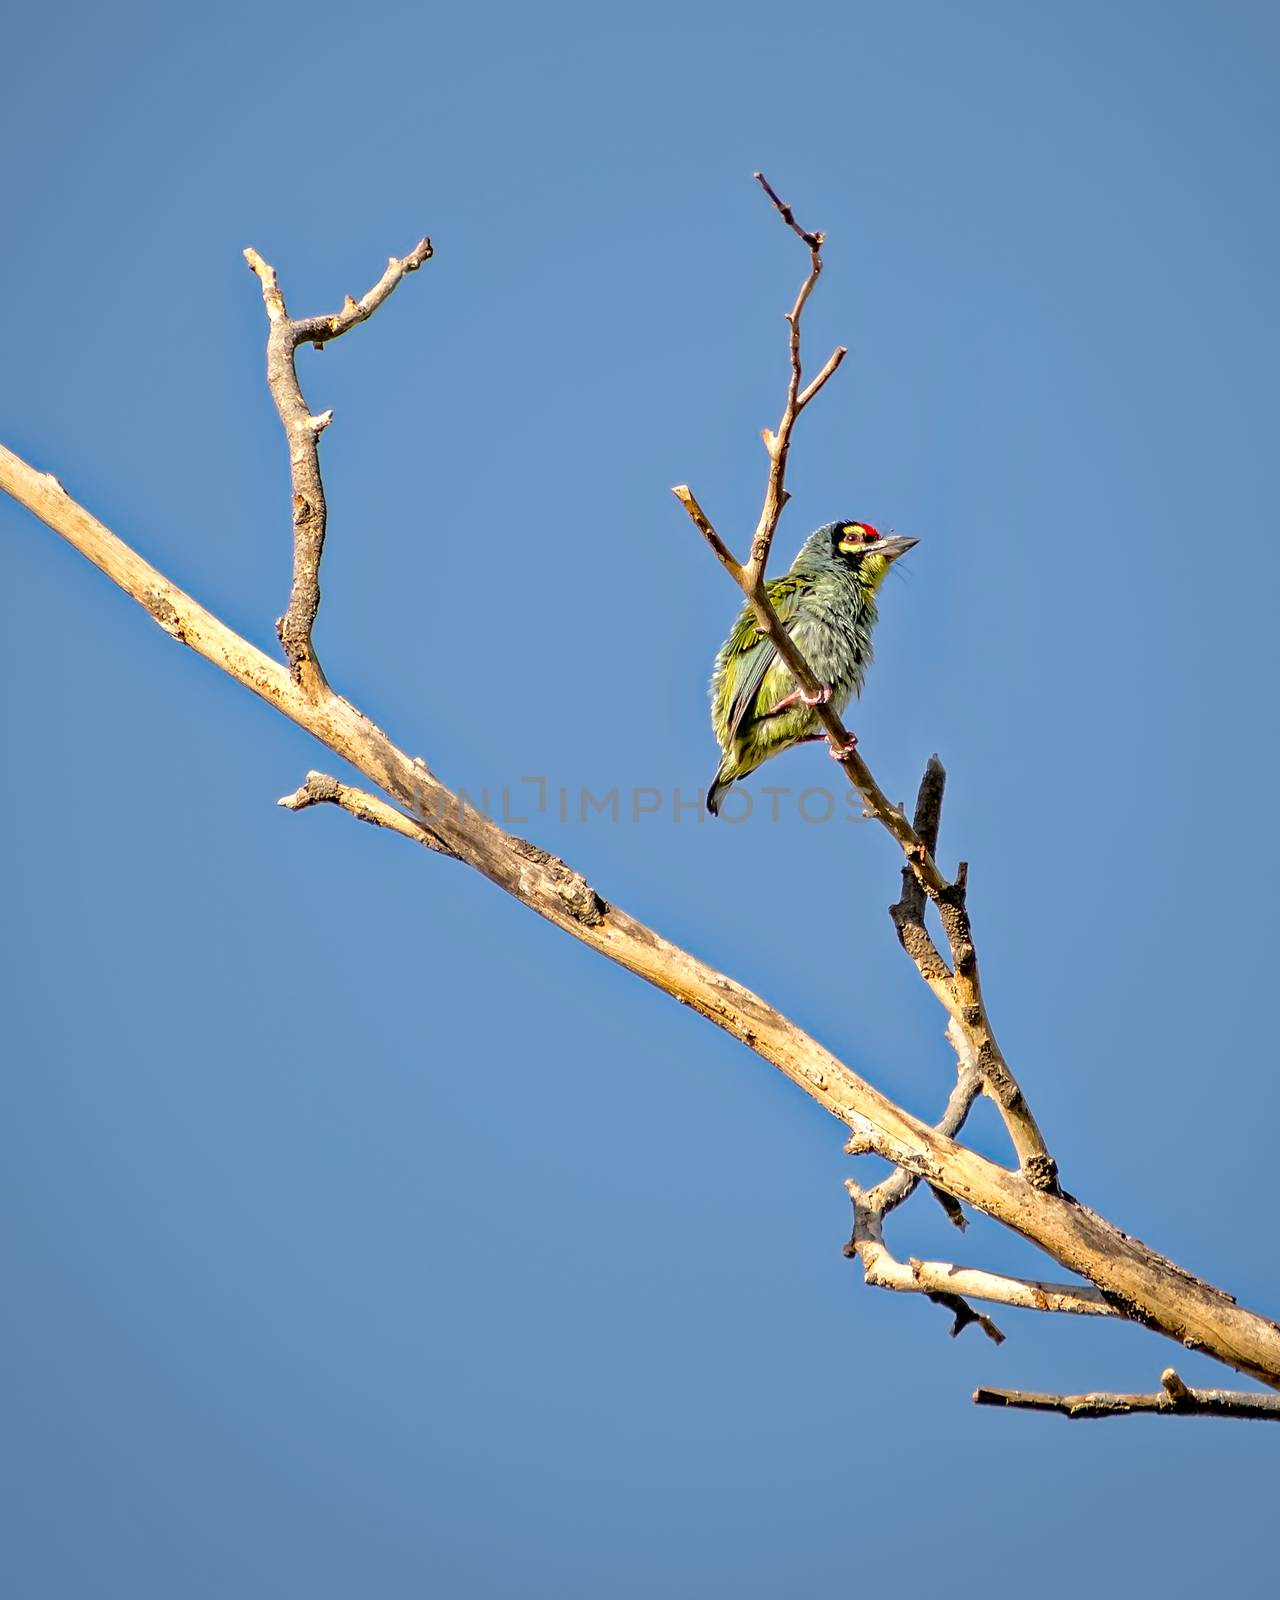 Copper smith barbet bird, sitting on a dry tree branch with clear blue sky background..